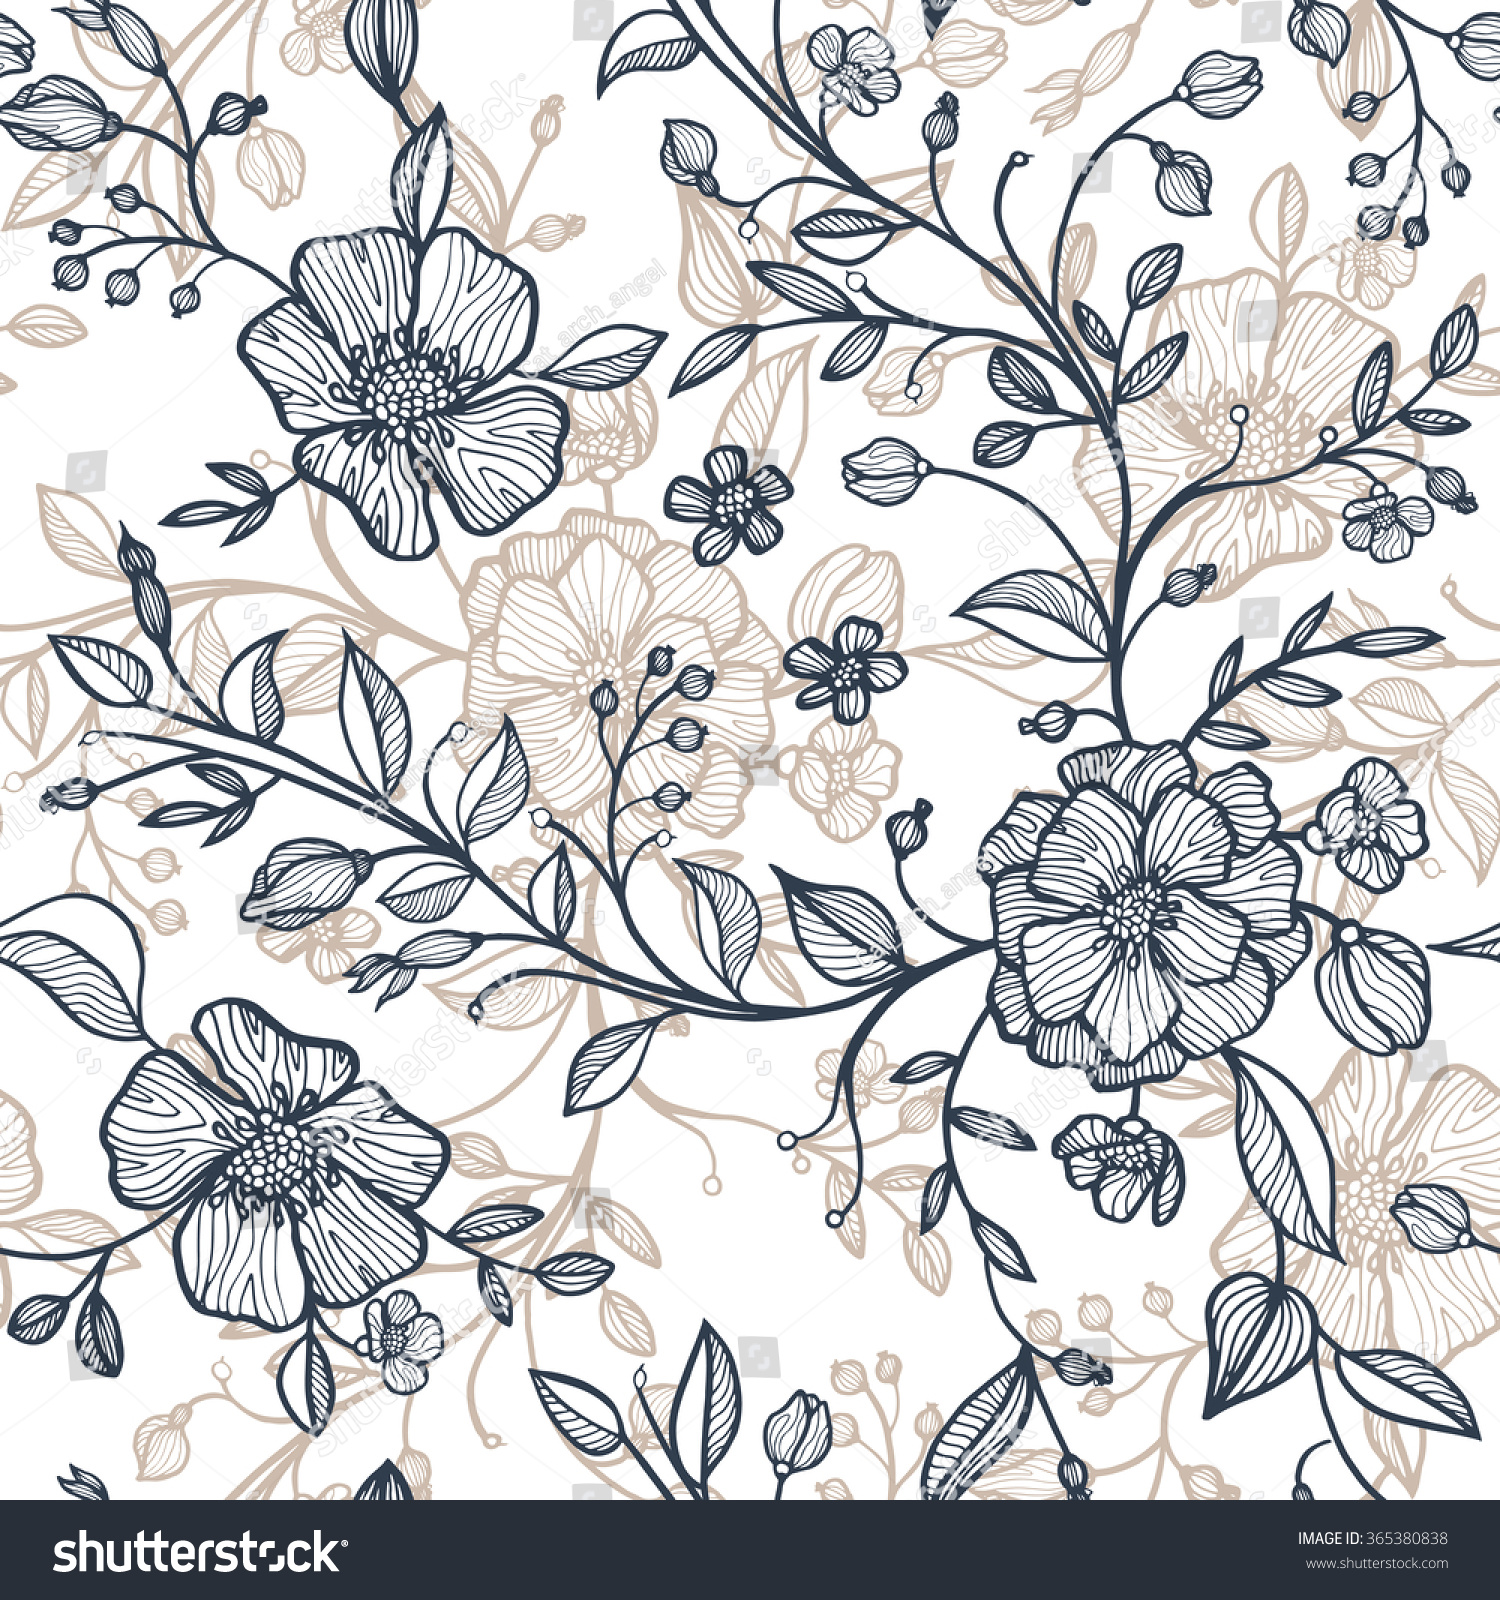 Hand Drawn Vector Seamless Floral Pattern Stock Vector ...